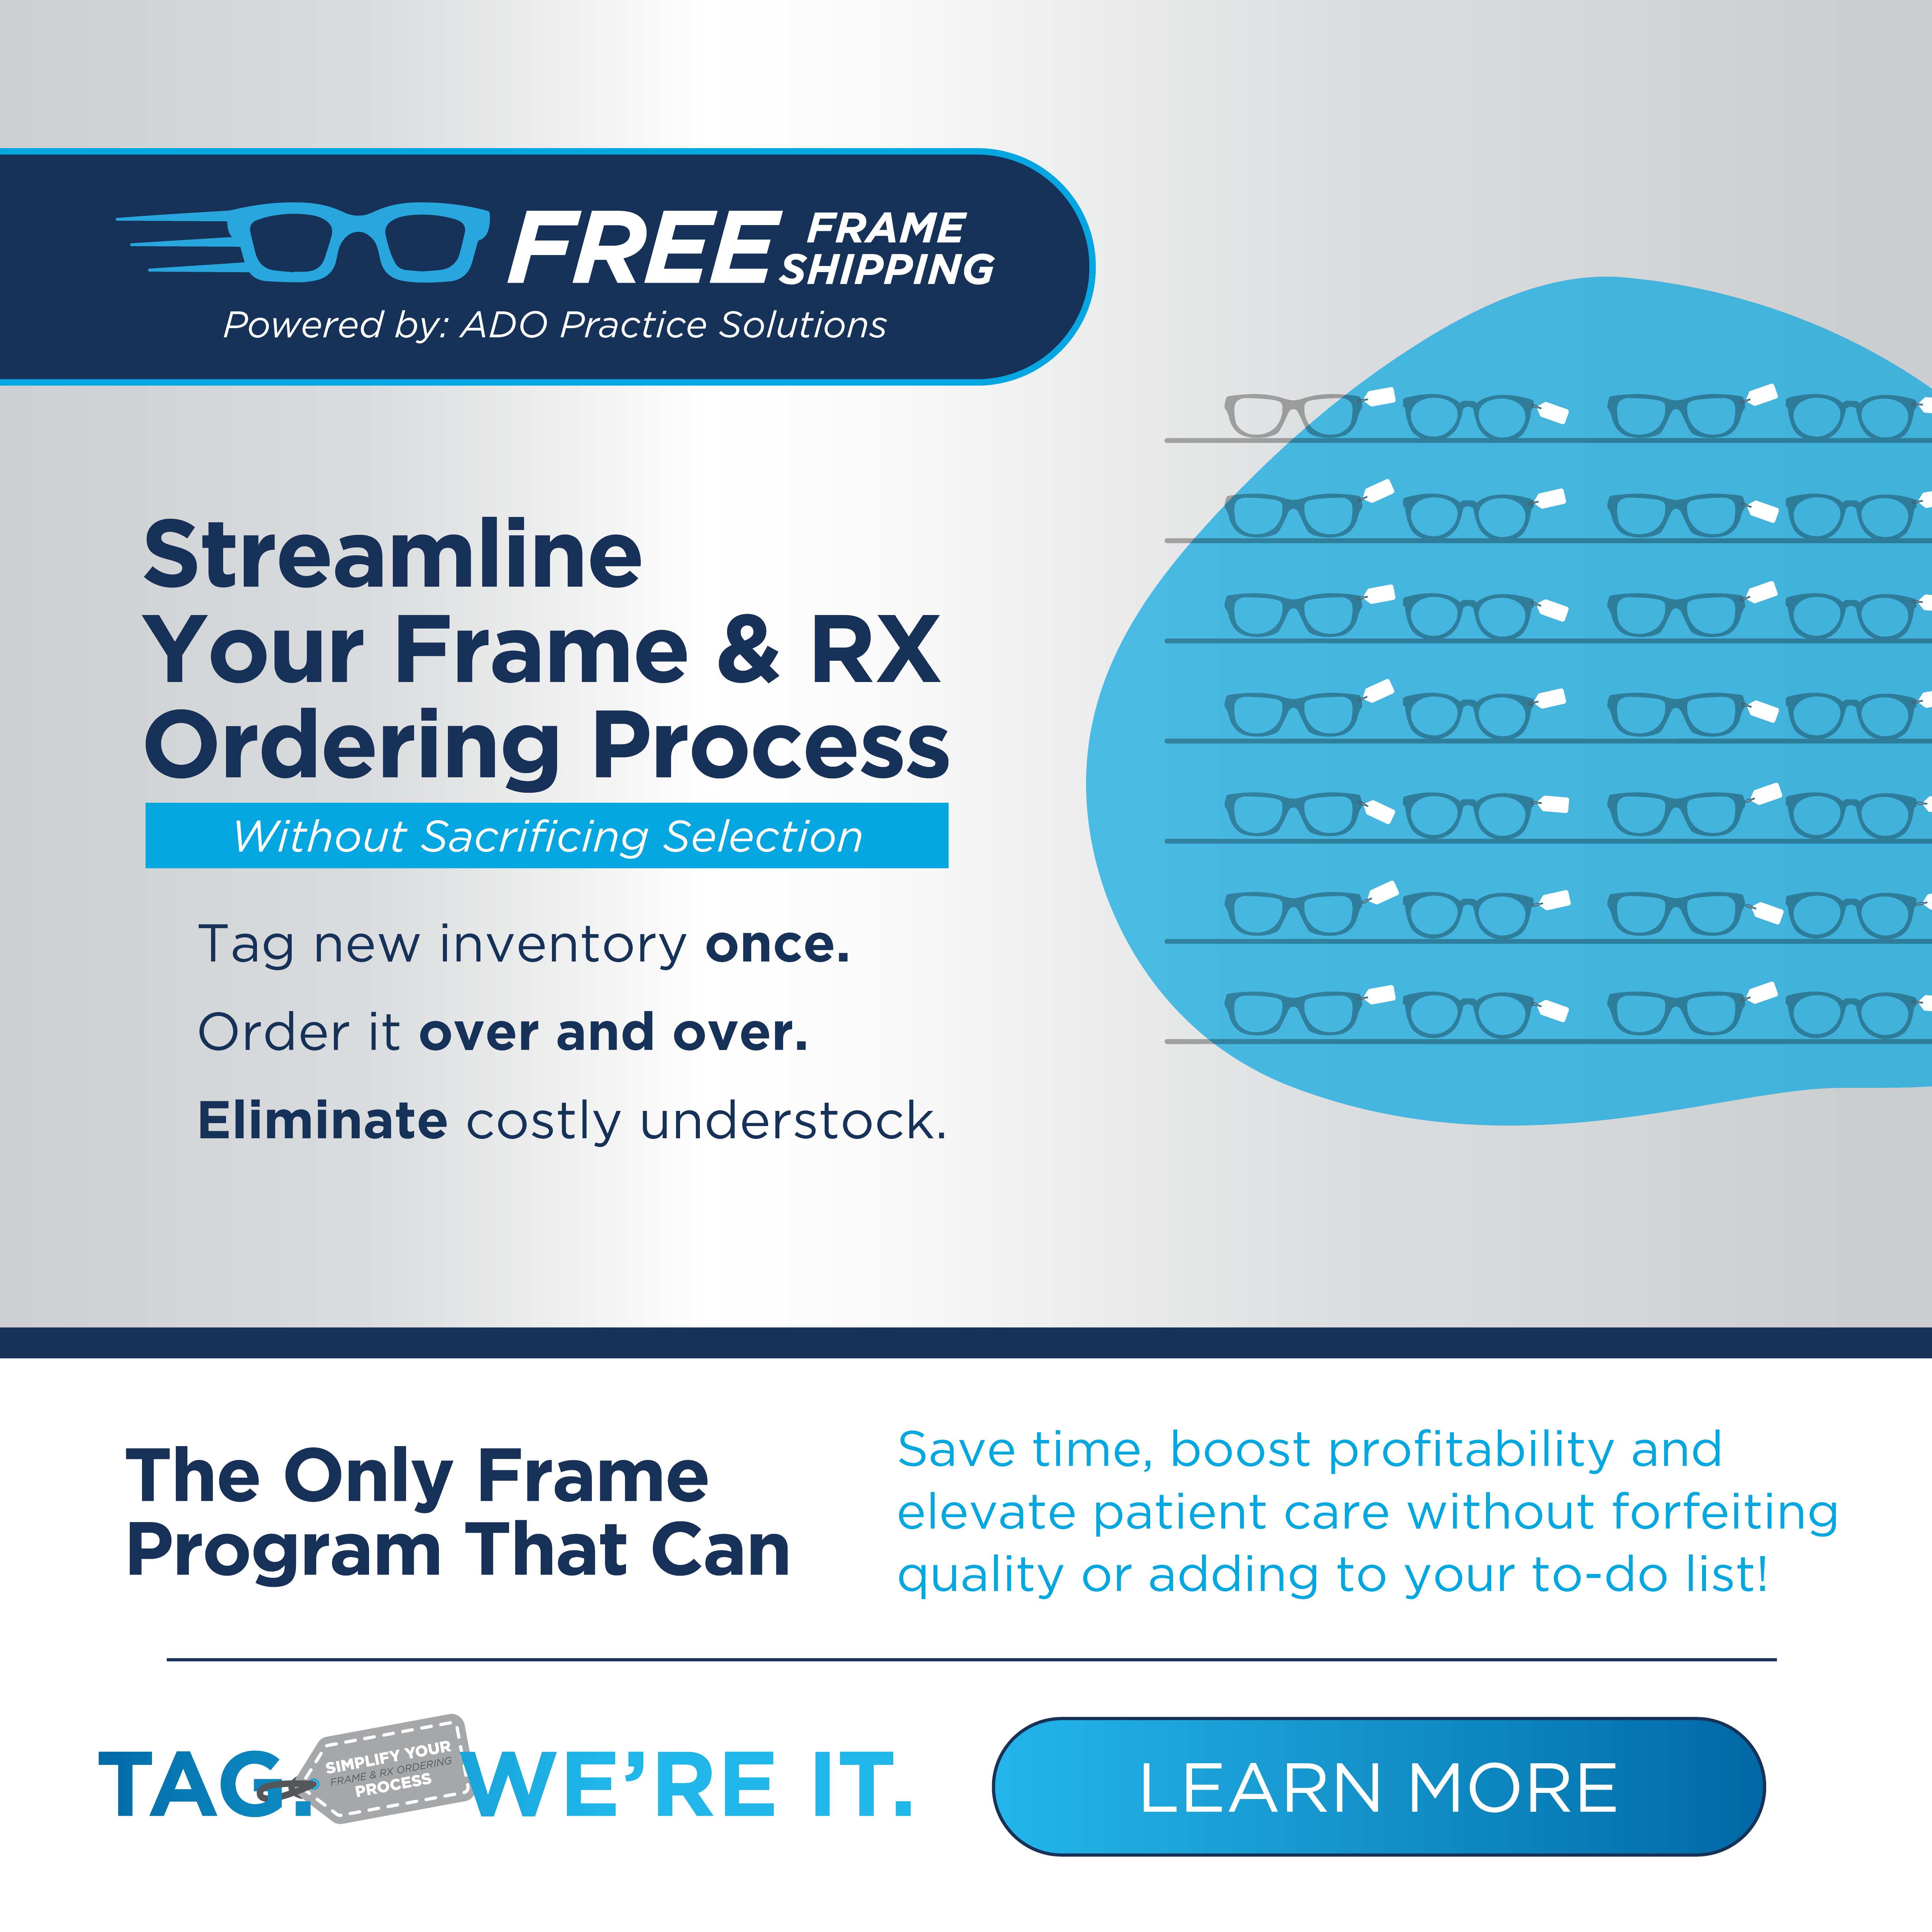 Free Frame Shipping Powered by ADO Practice Solutions